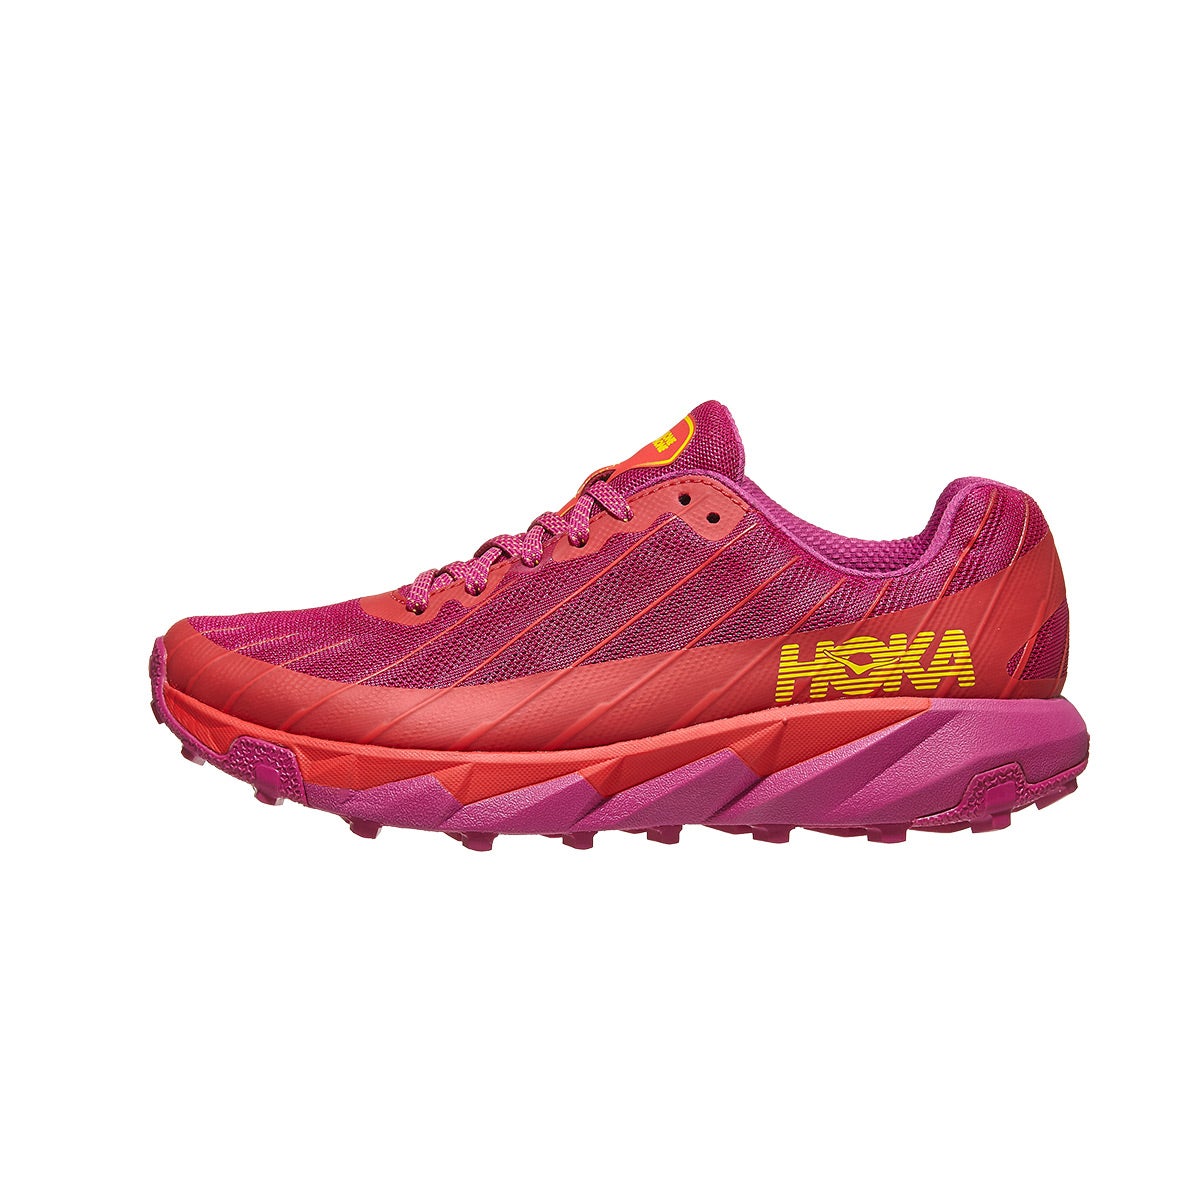 HOKA ONE ONE Torrent Women's Shoes Cactus Flower/Red 360° View ...